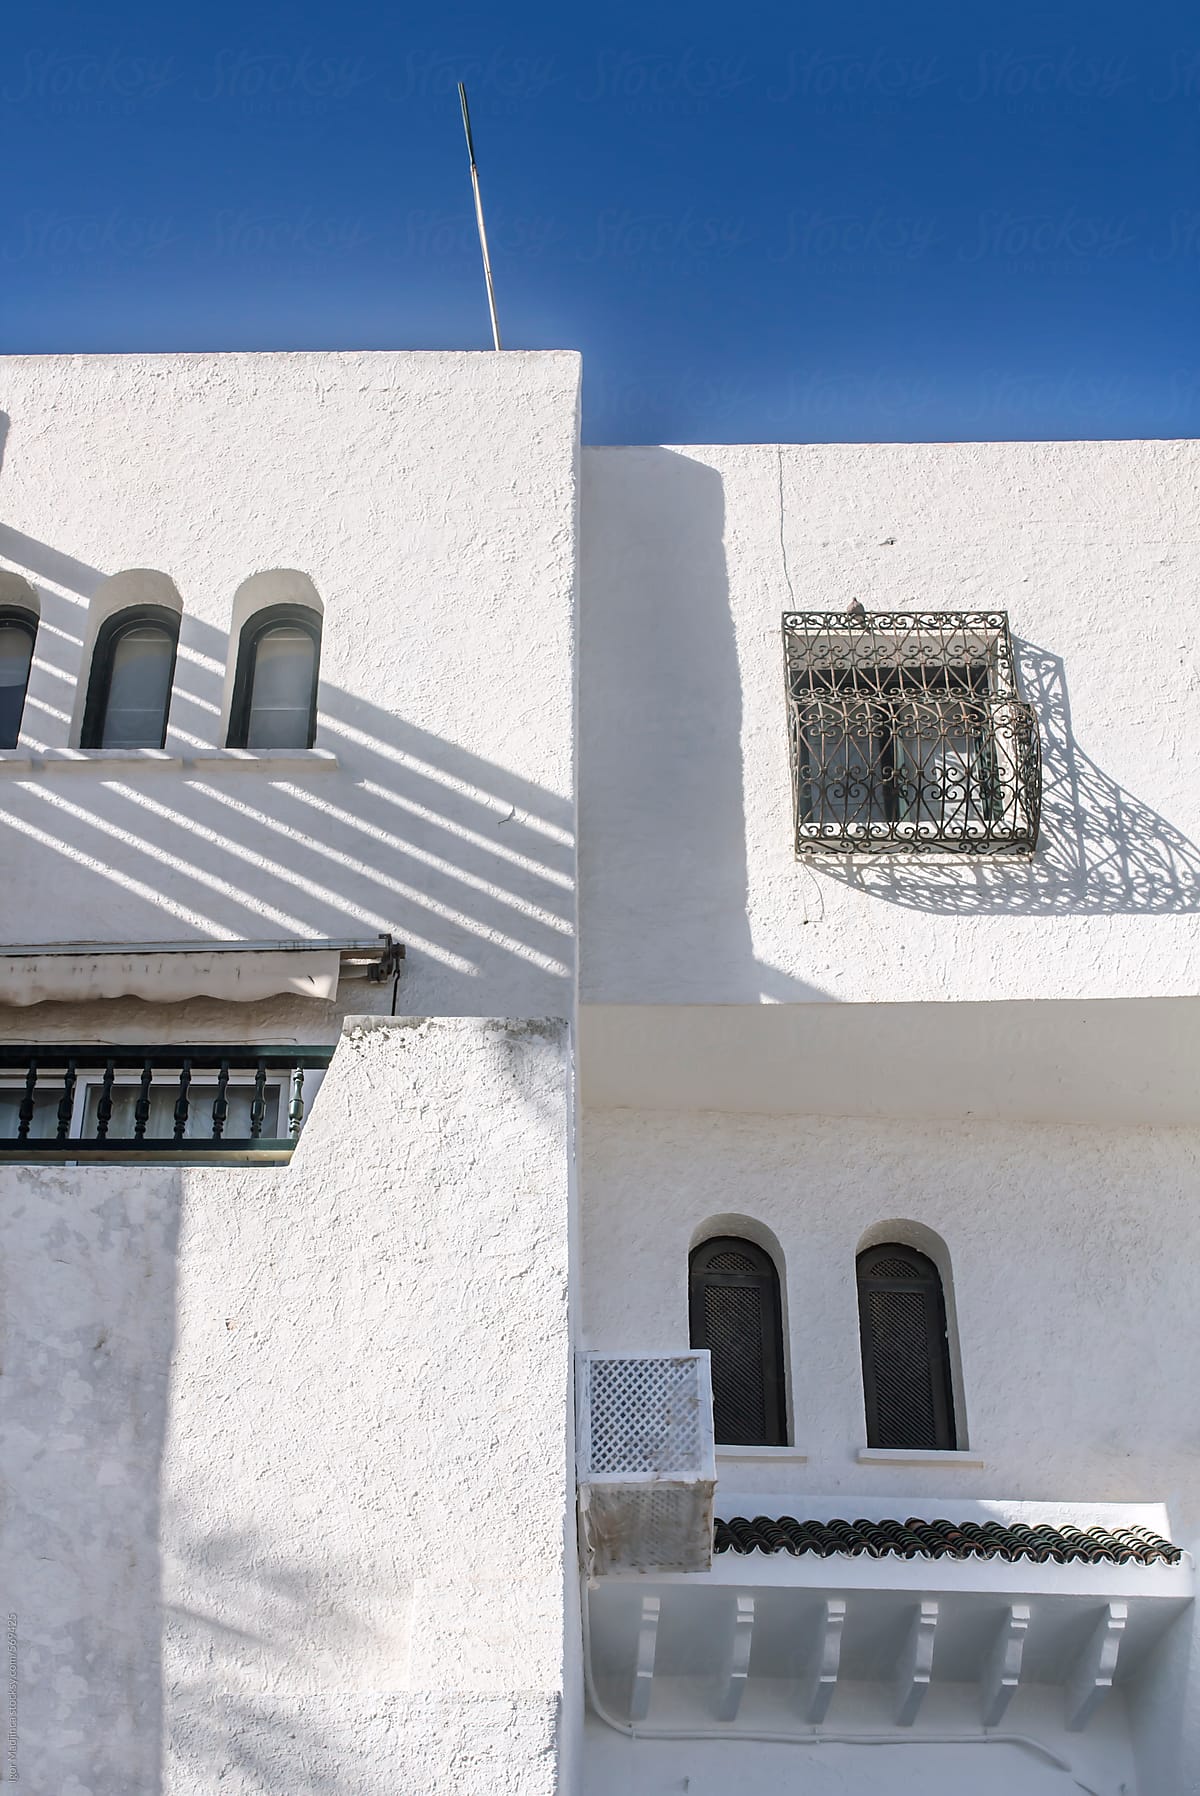 traditional North African architecture, minimalism,shadows, white